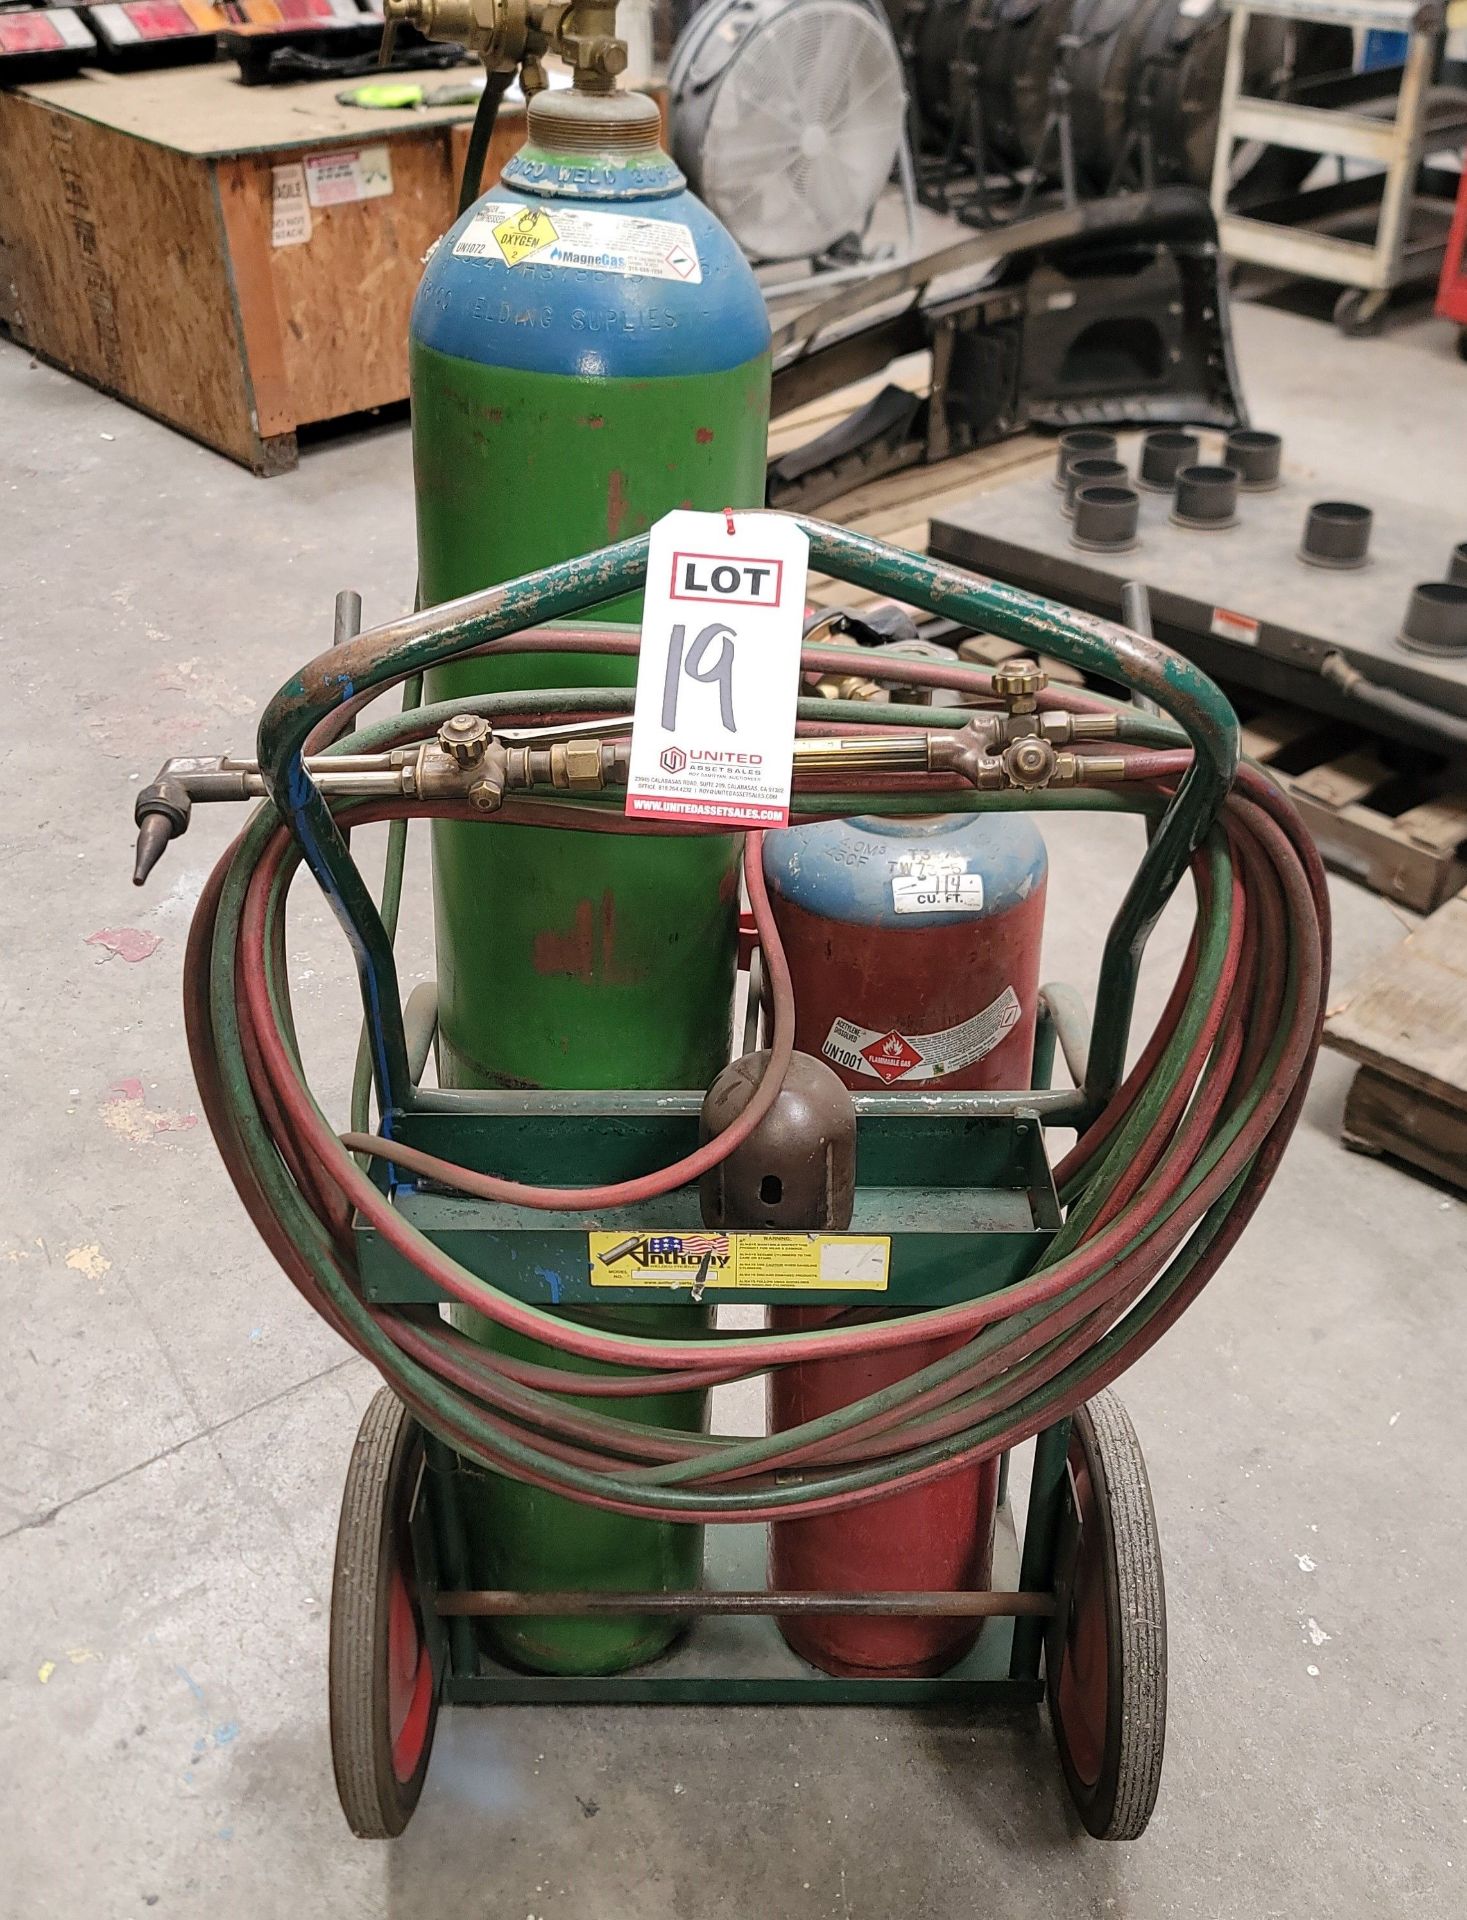 OXY-ACETYLENE CART W/ VICTOR CUTTING TORCH, HOSES, REGULATORS, GAS CYLINDERS NOT INCLUDED